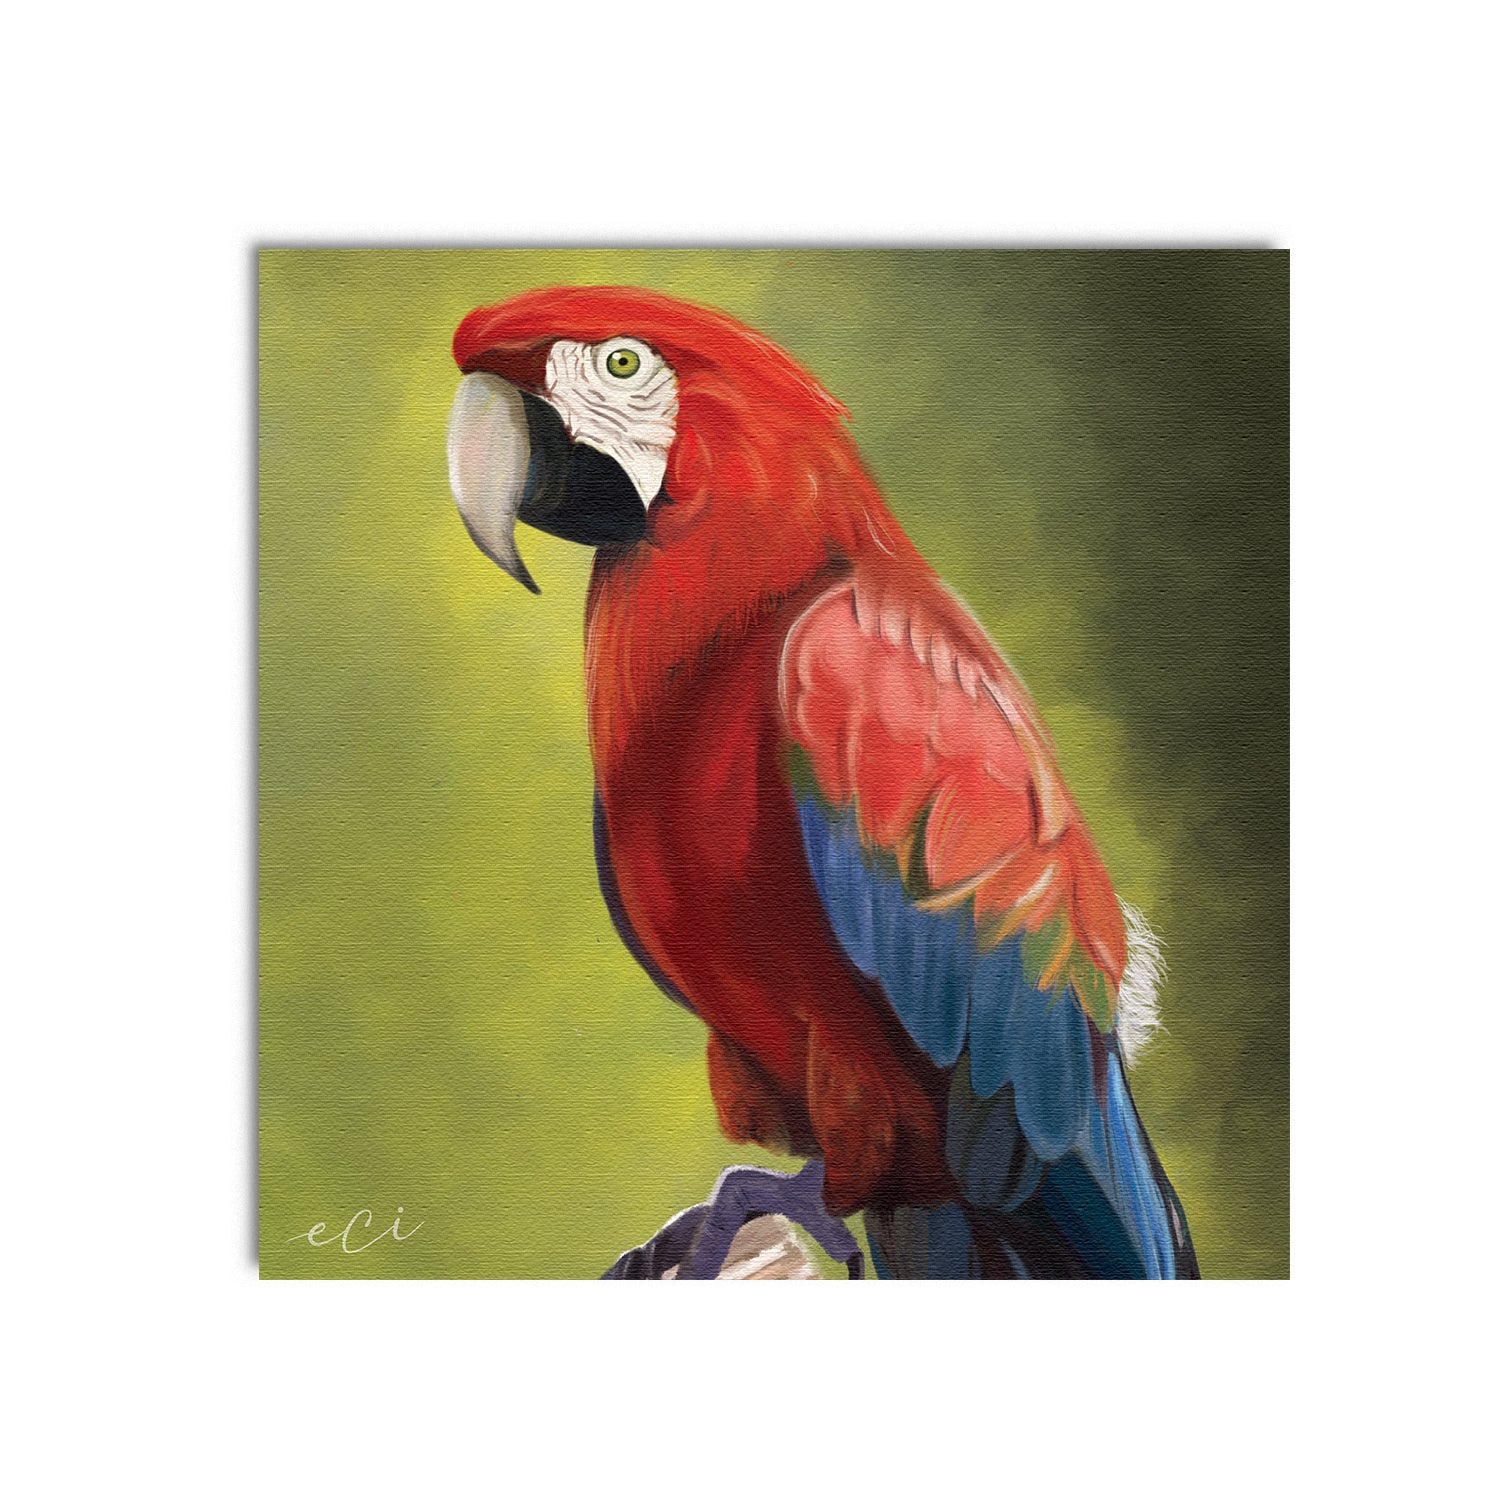 Colorful Parrot on Tree Original Design Canvas Printed Wall Painting